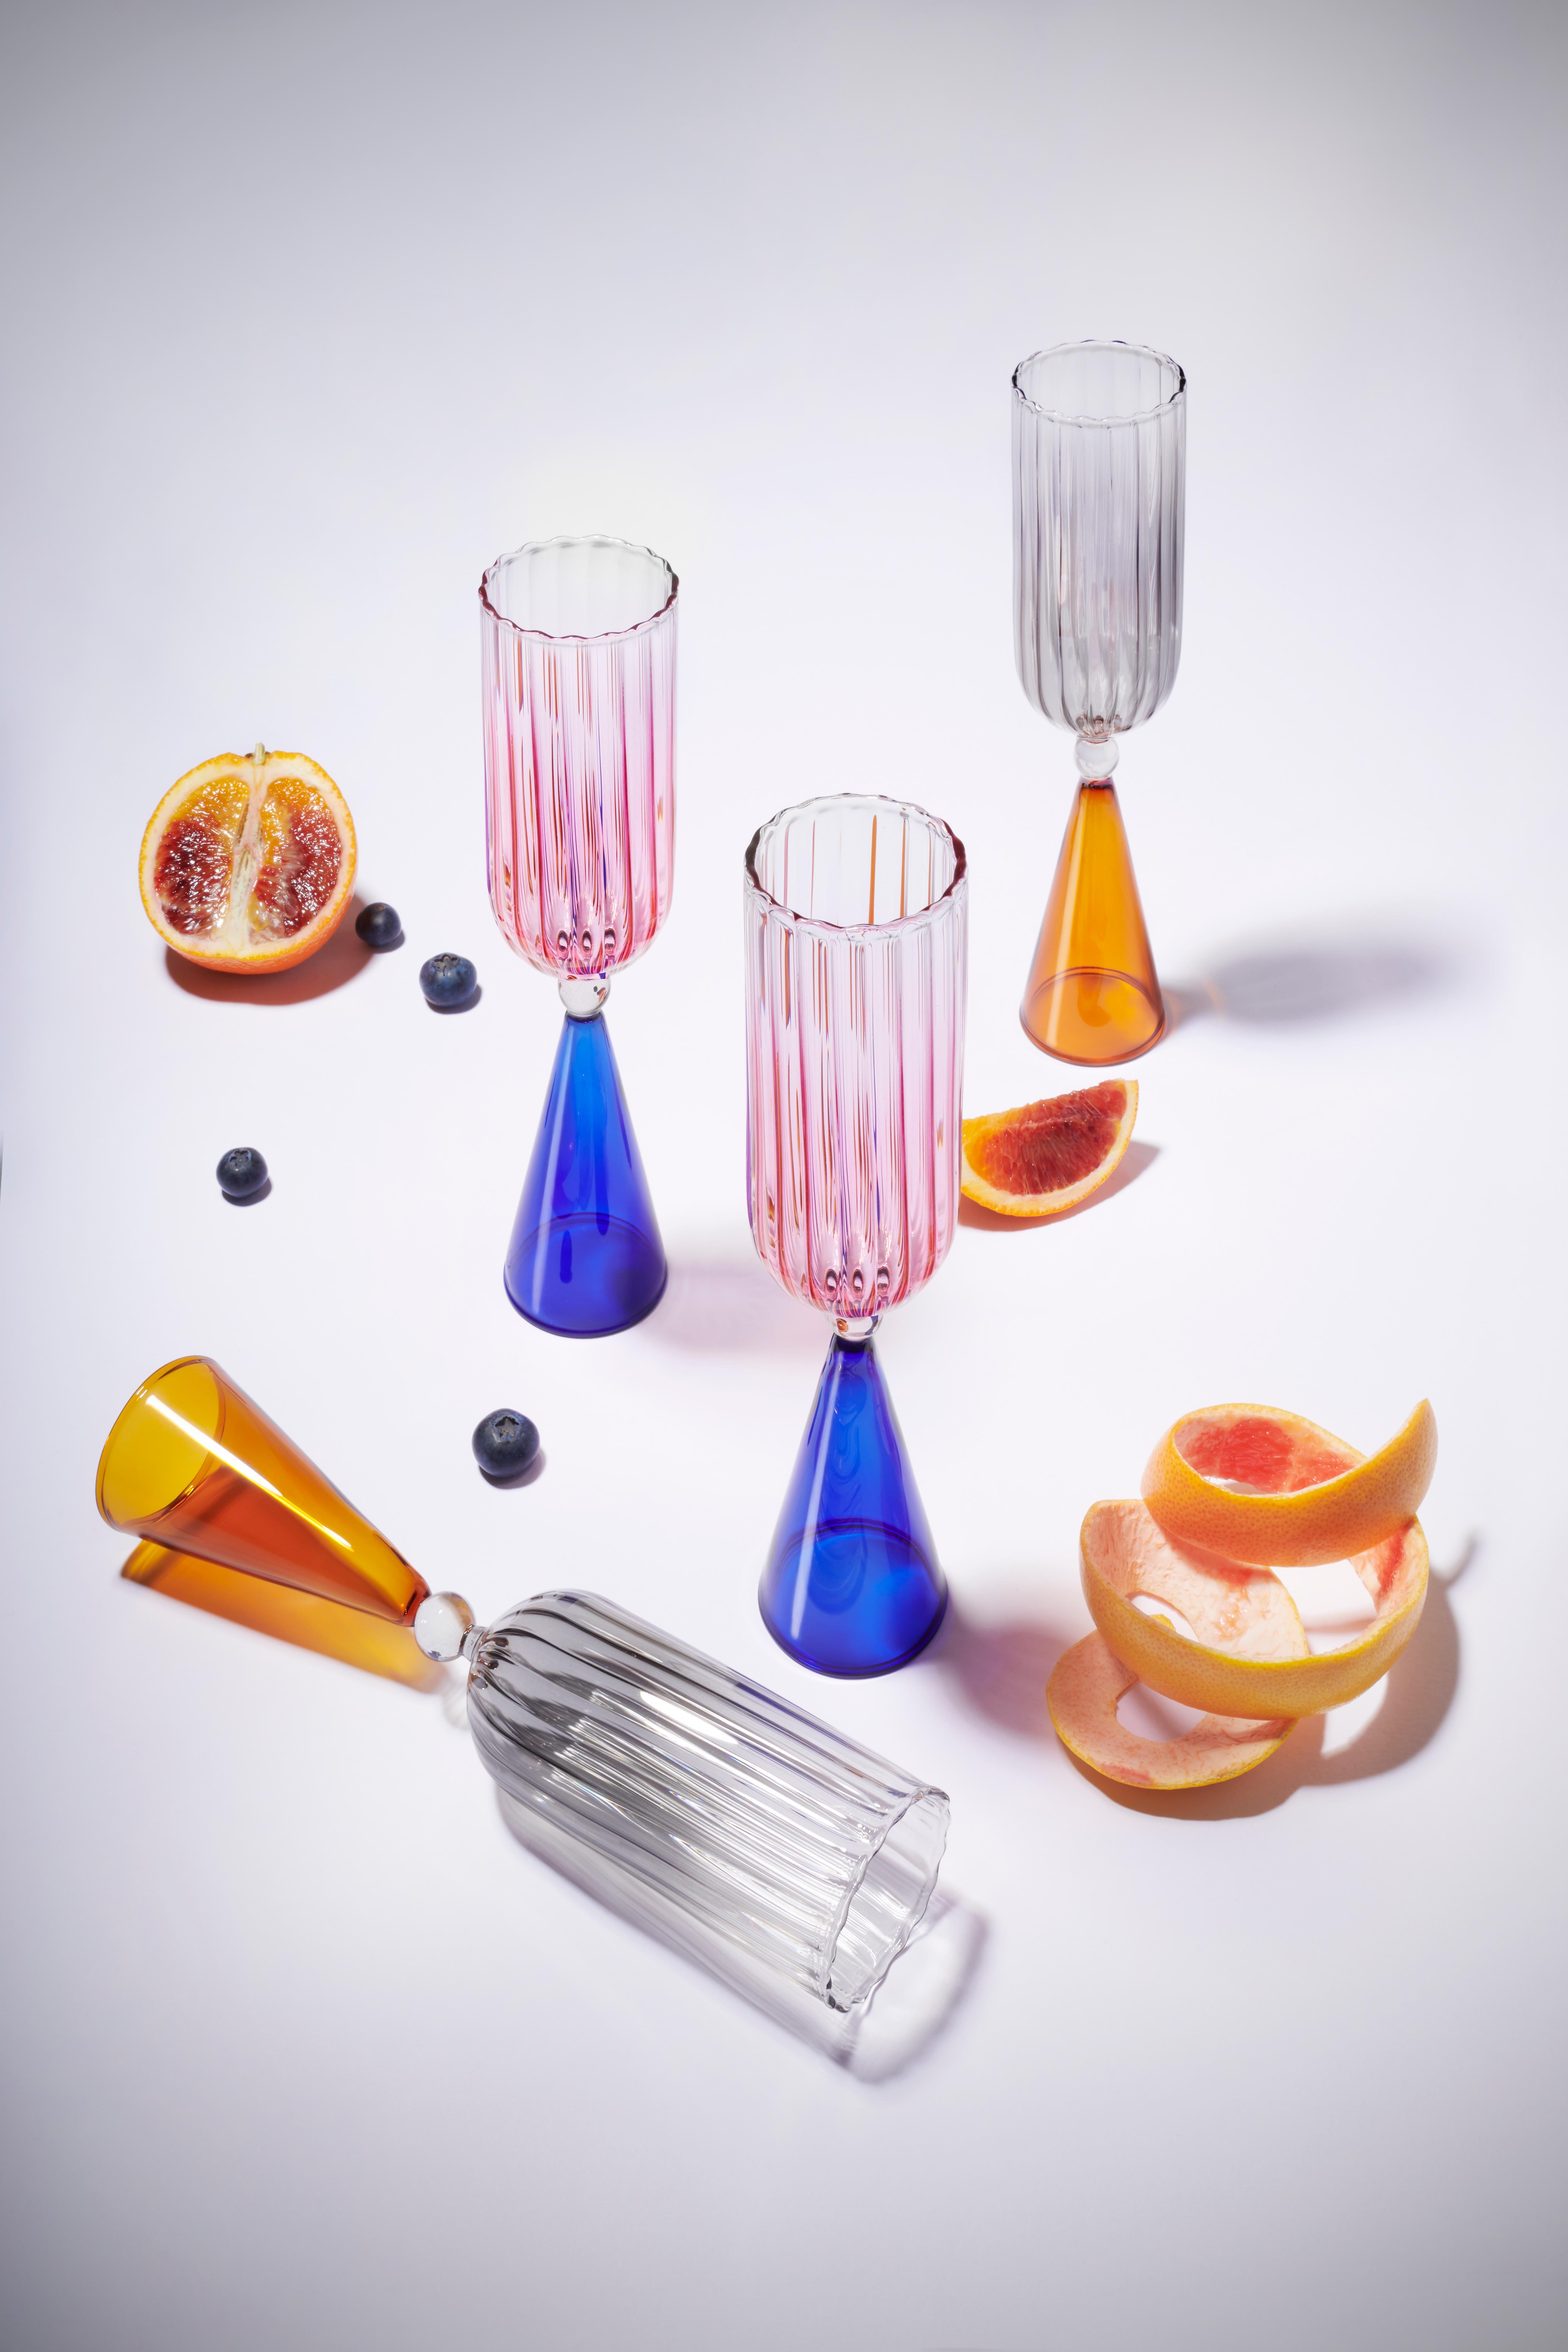 Calypso collection investigates new ways of conviviality: fed by imaginary worlds, this tableware pieces make possible to dream of exotic and uncontaminated landscapes. Calypso synthesizes with its shapes the dialogue between function and